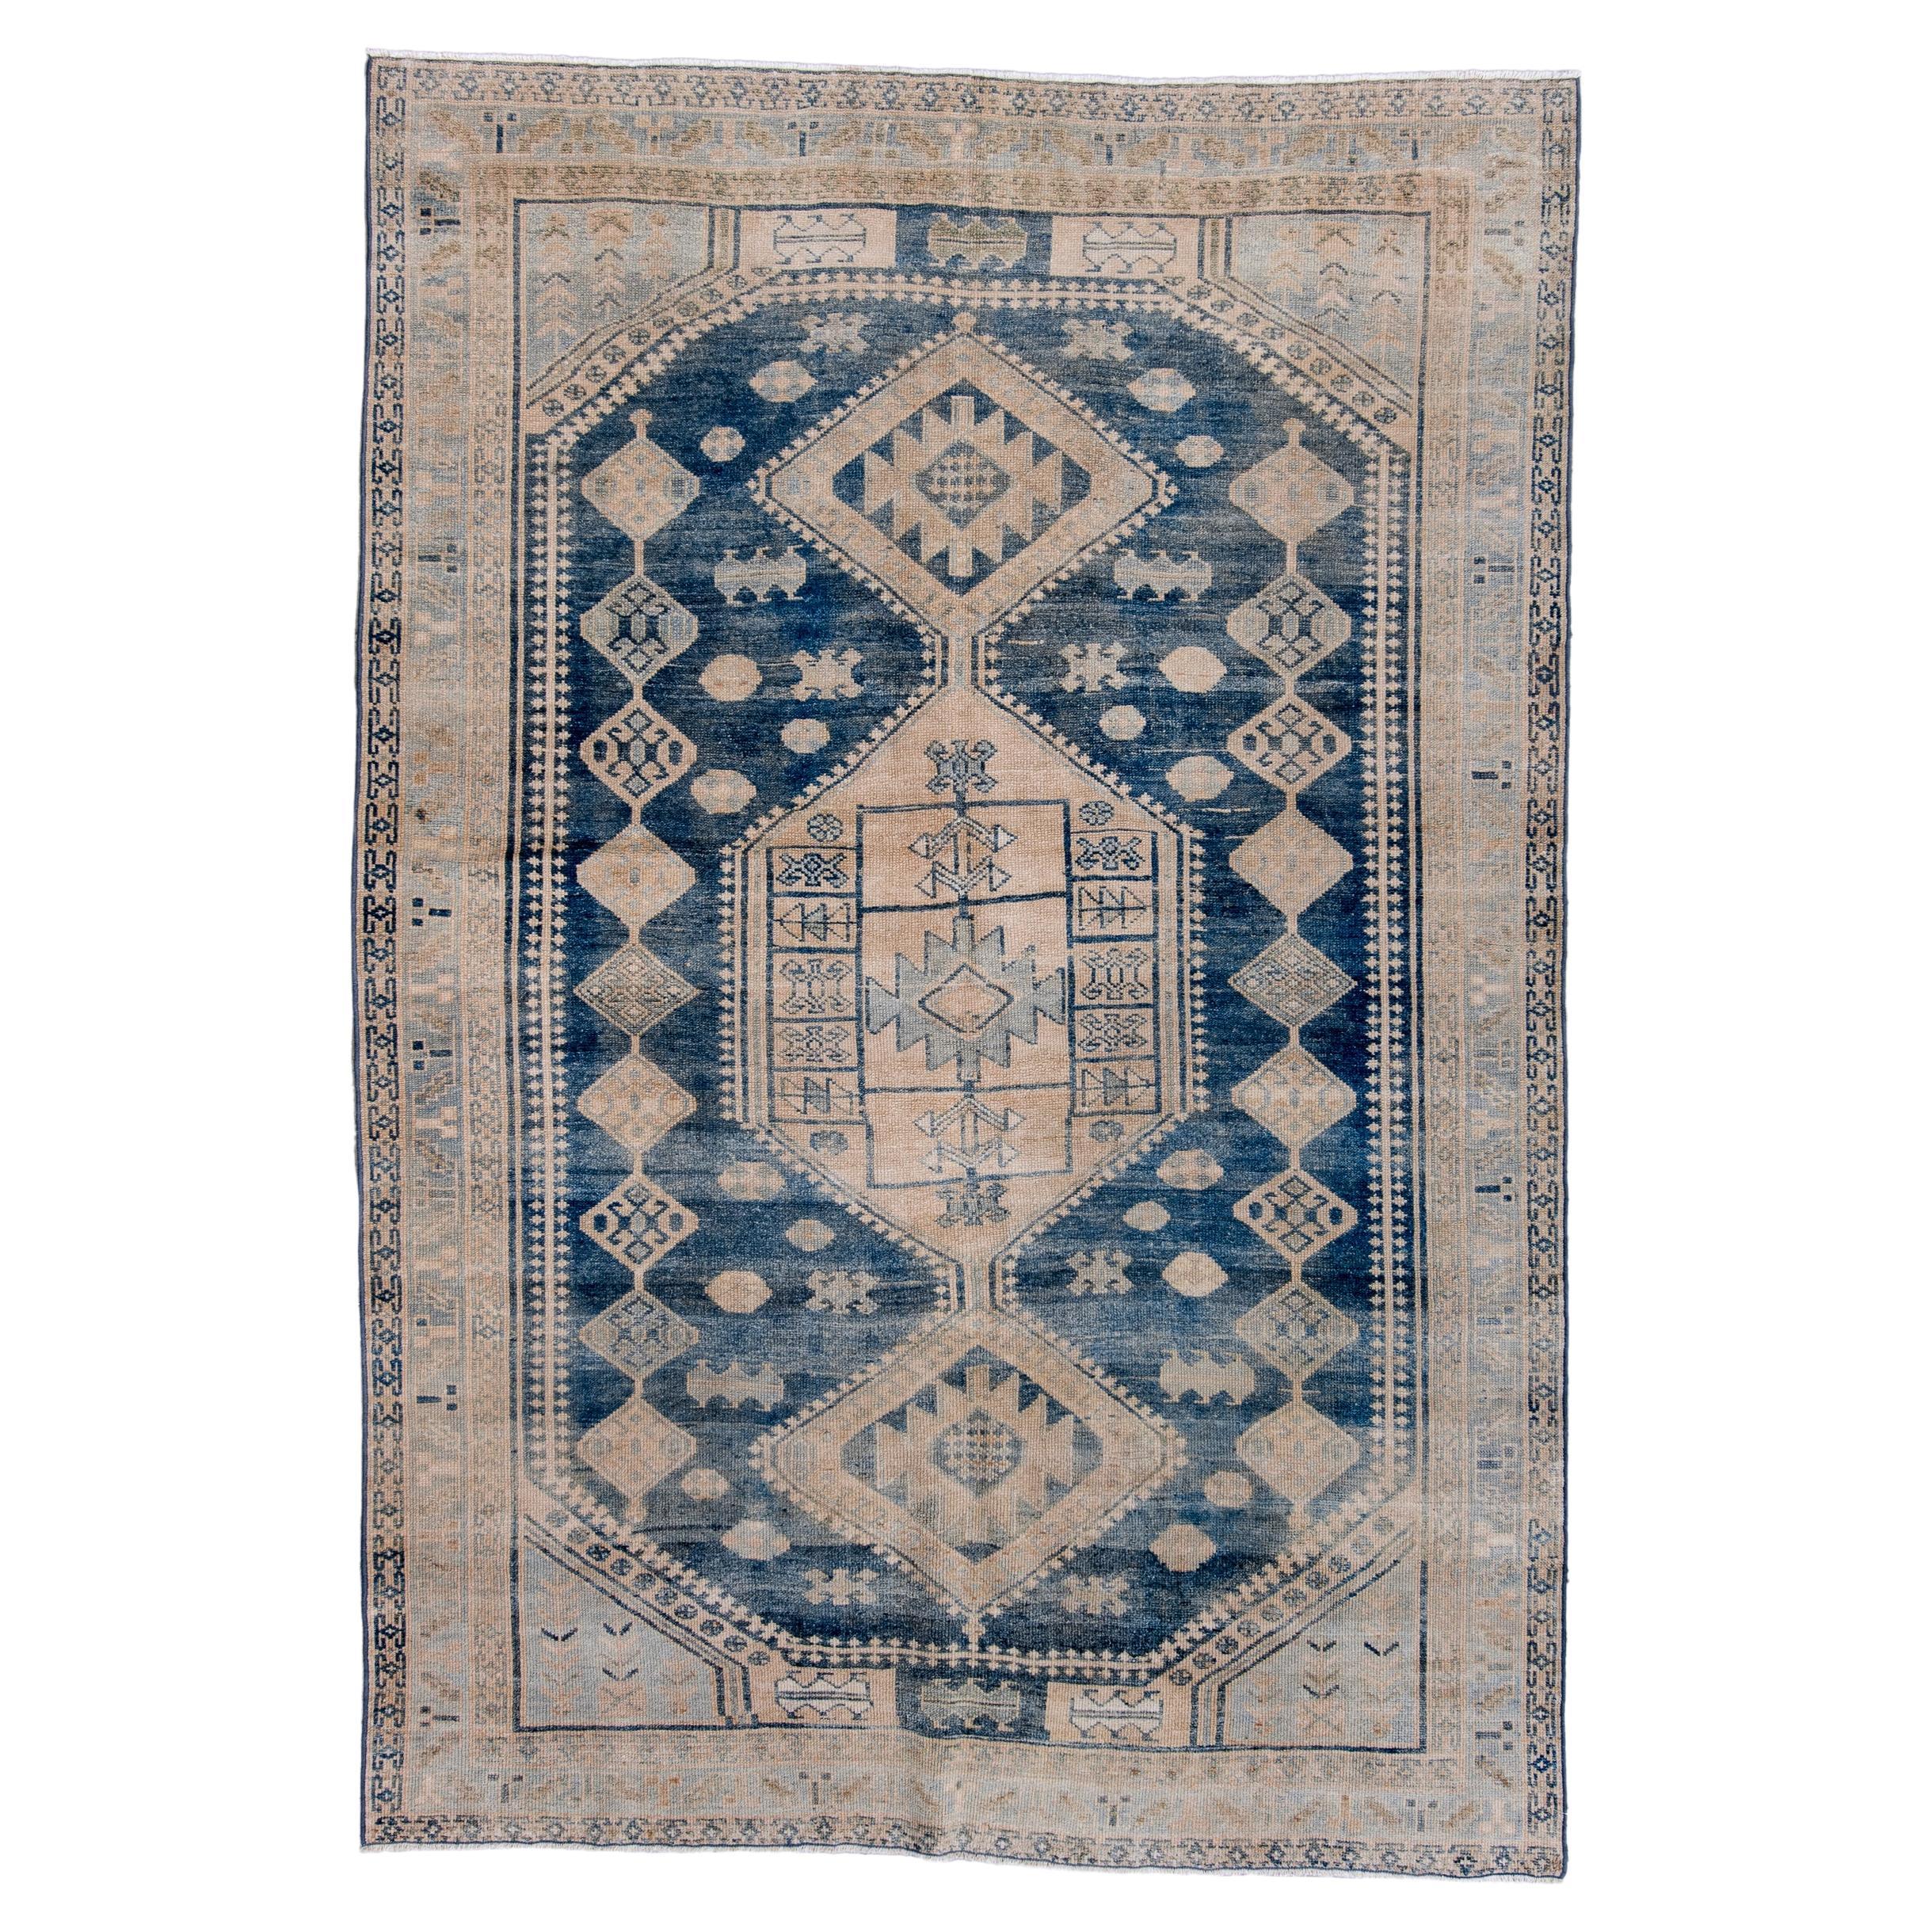 Antique Afshar - Geometric Weaving Design in Contemporary Feel For Sale